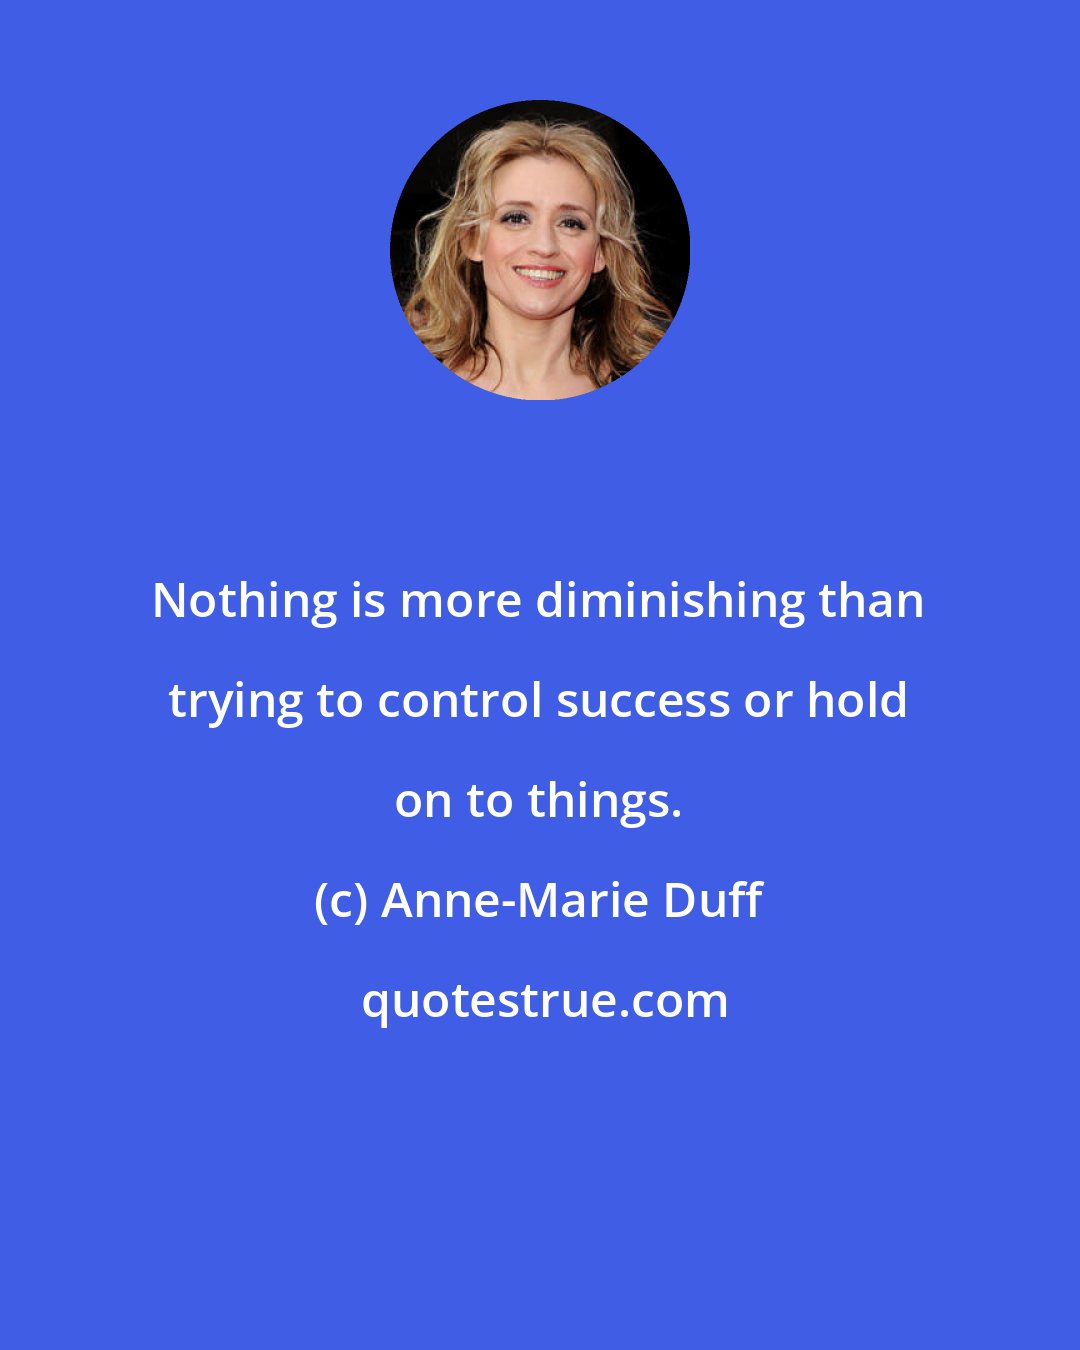 Anne-Marie Duff: Nothing is more diminishing than trying to control success or hold on to things.